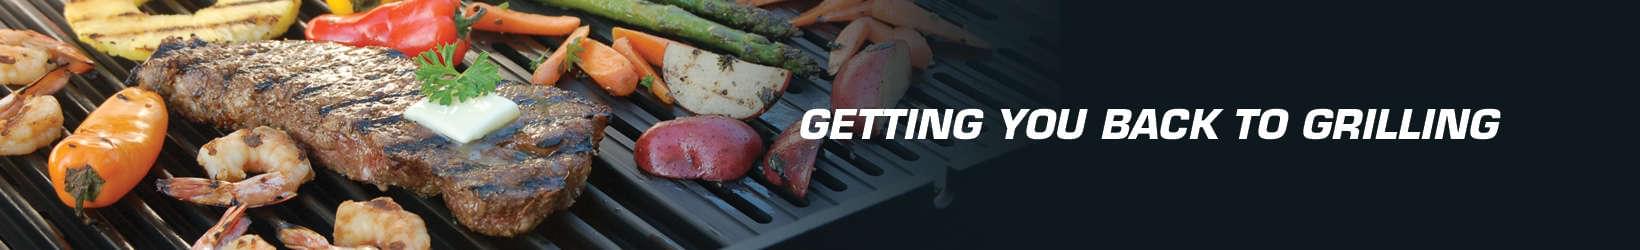 Getting You Back To Grilling